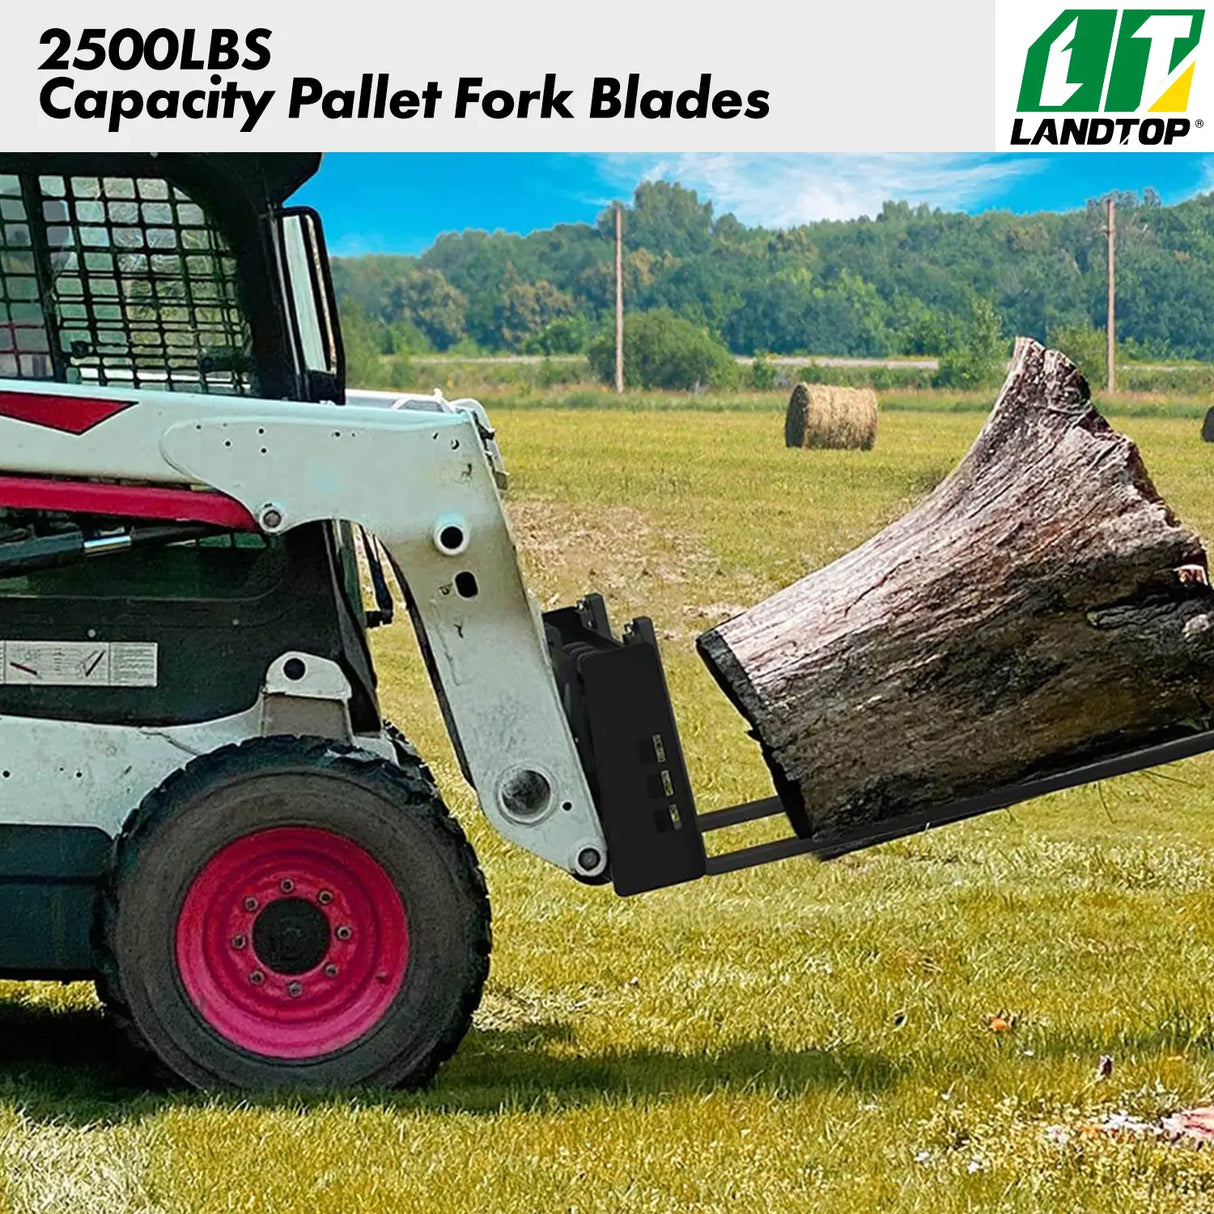 42" Pallet Fork Blades, 2500lbs Capacity Forklift Blades for Tractors Loaders Skid Steer Attachment, 2 Packs